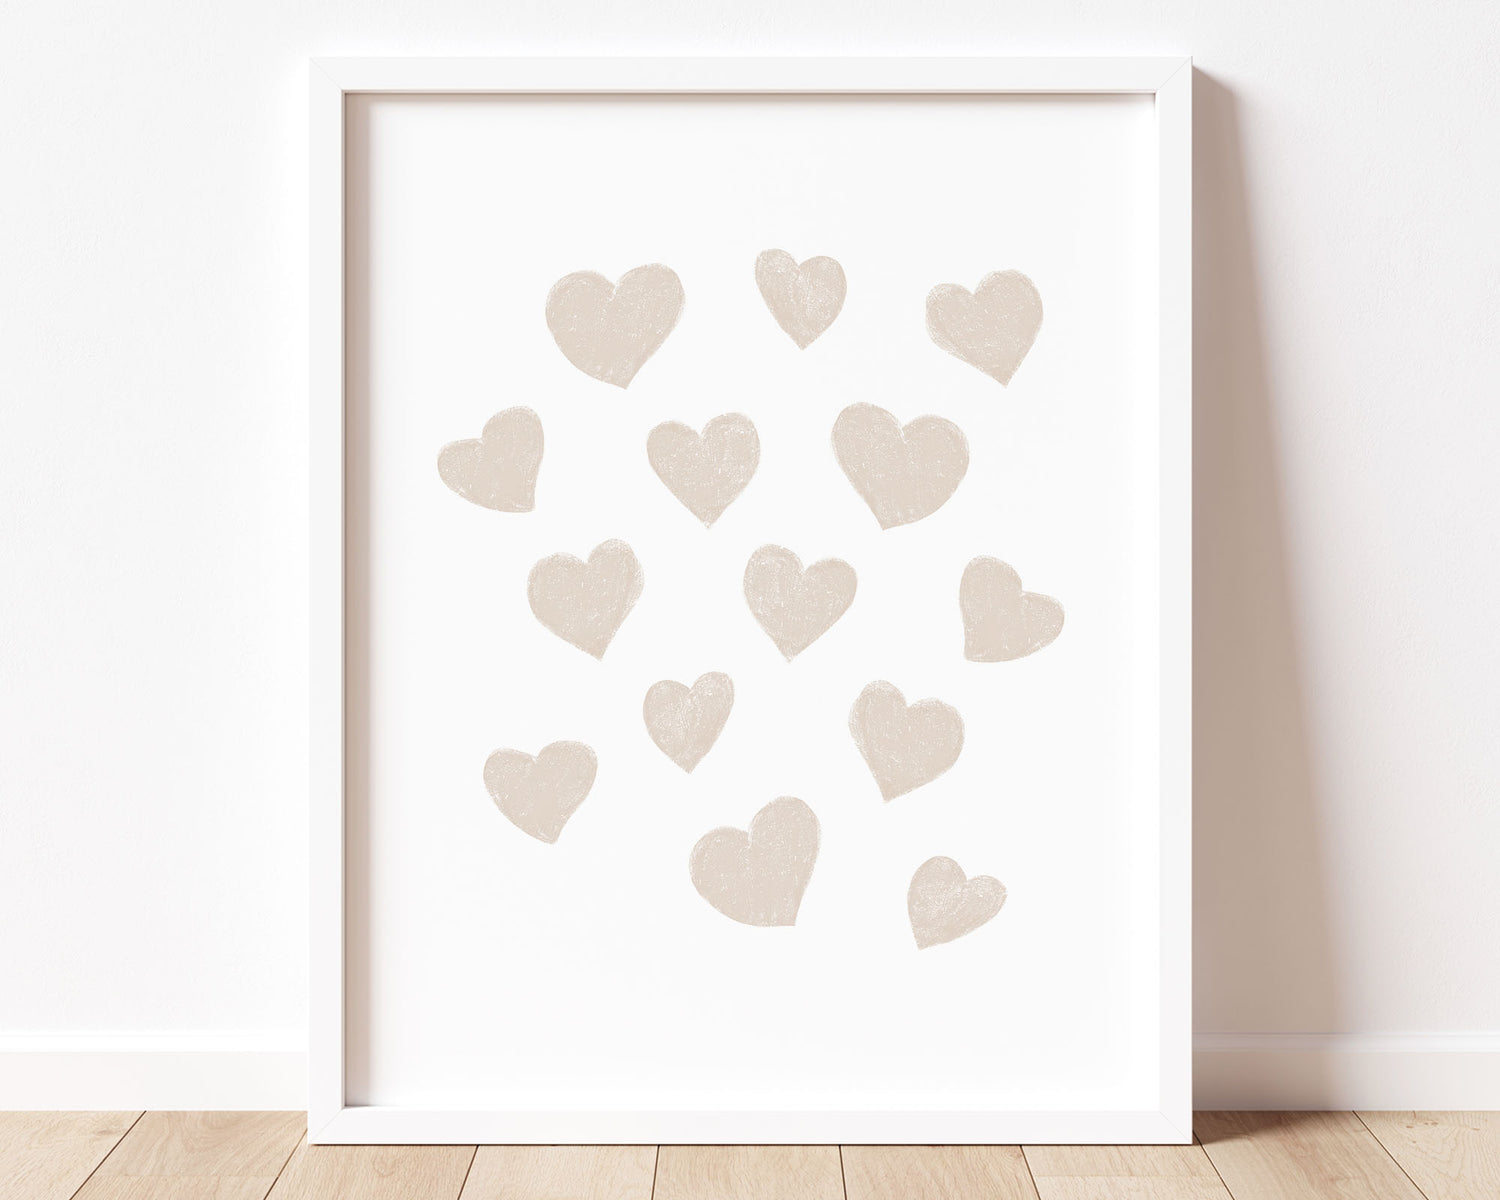 Neutral tan small scattered hearts in chalky brushstroke illlustration style perfect for Baby Nursery Décor, Little Boys Bedroom Wall Art, Toddler Girls Room Wall Hangings, Kiddos Bathroom Wall Art and Childrens Playroom Décor.